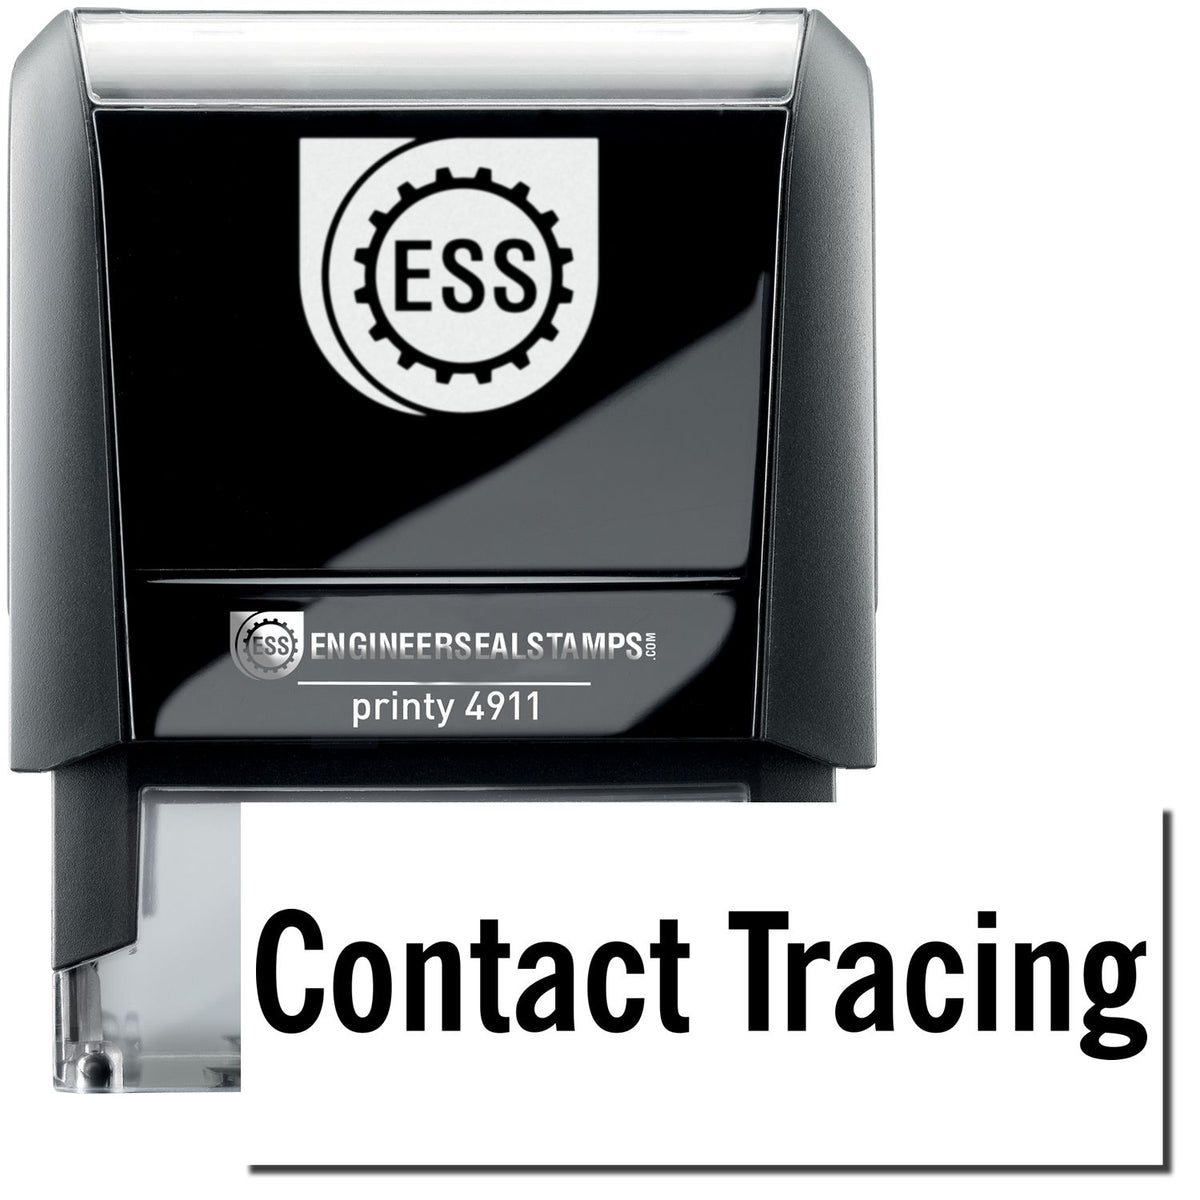 A self-inking stamp with a stamped image showing how the text &quot;Contact Tracing&quot; is displayed after stamping.